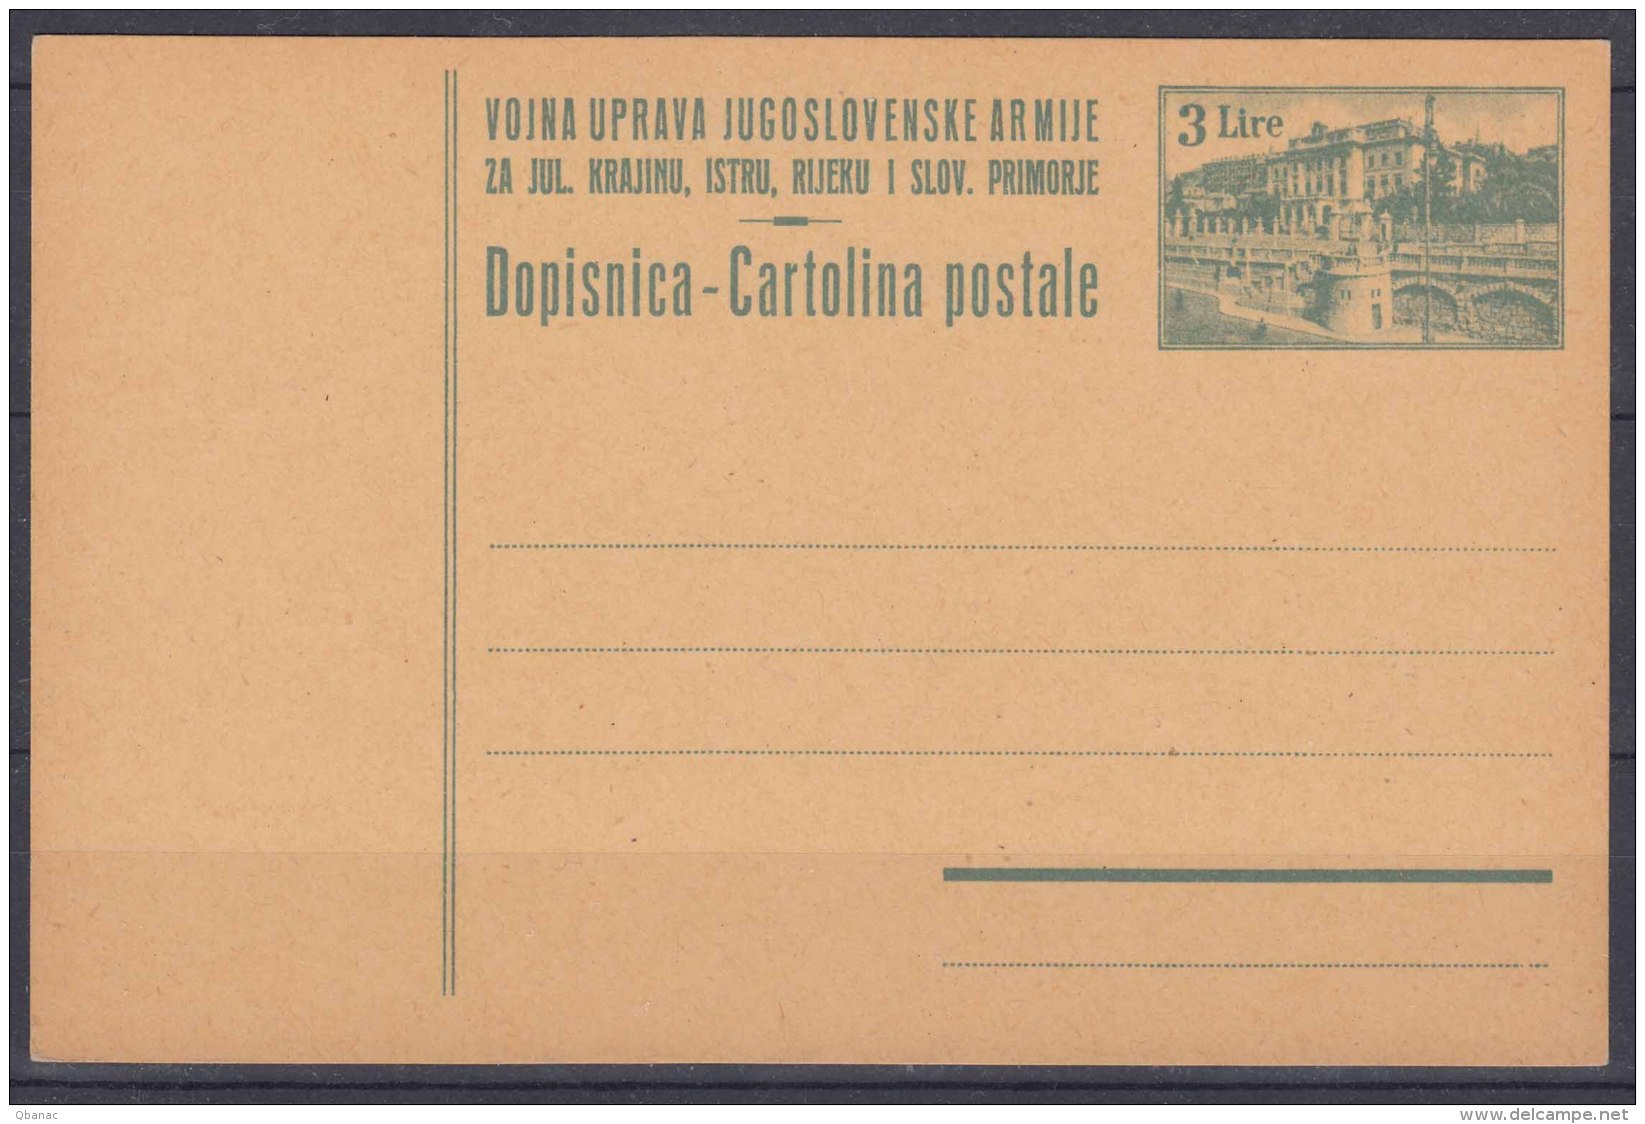 Yugoslavia Occ. Of Italy, Trieste Zone B, Postal Stationery Card In Rare Brown Cardboard Variety, Excellent Mint Cond. - Marcofilie